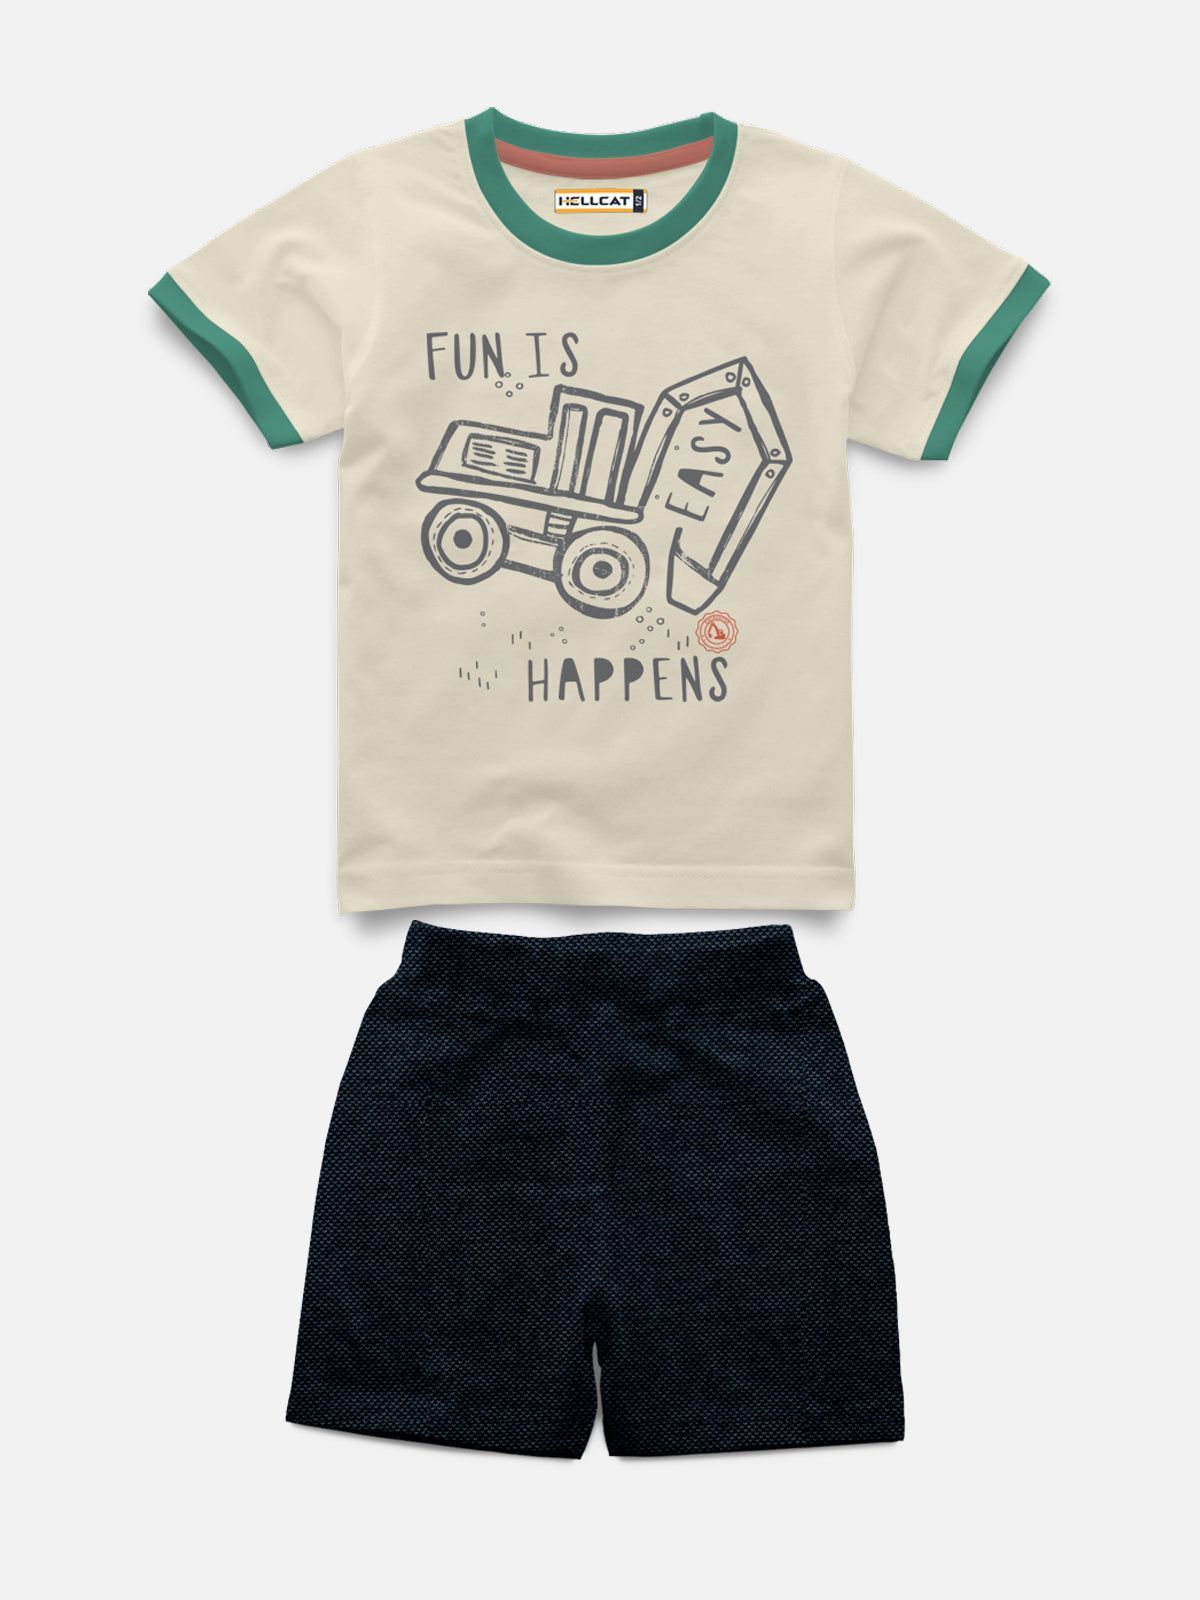 Half Sleeve With Rib Printed Tshirt with Comfy Solid Shorts for Infants & Boys - Pack of 2 (1 T-shirt & 1 short)